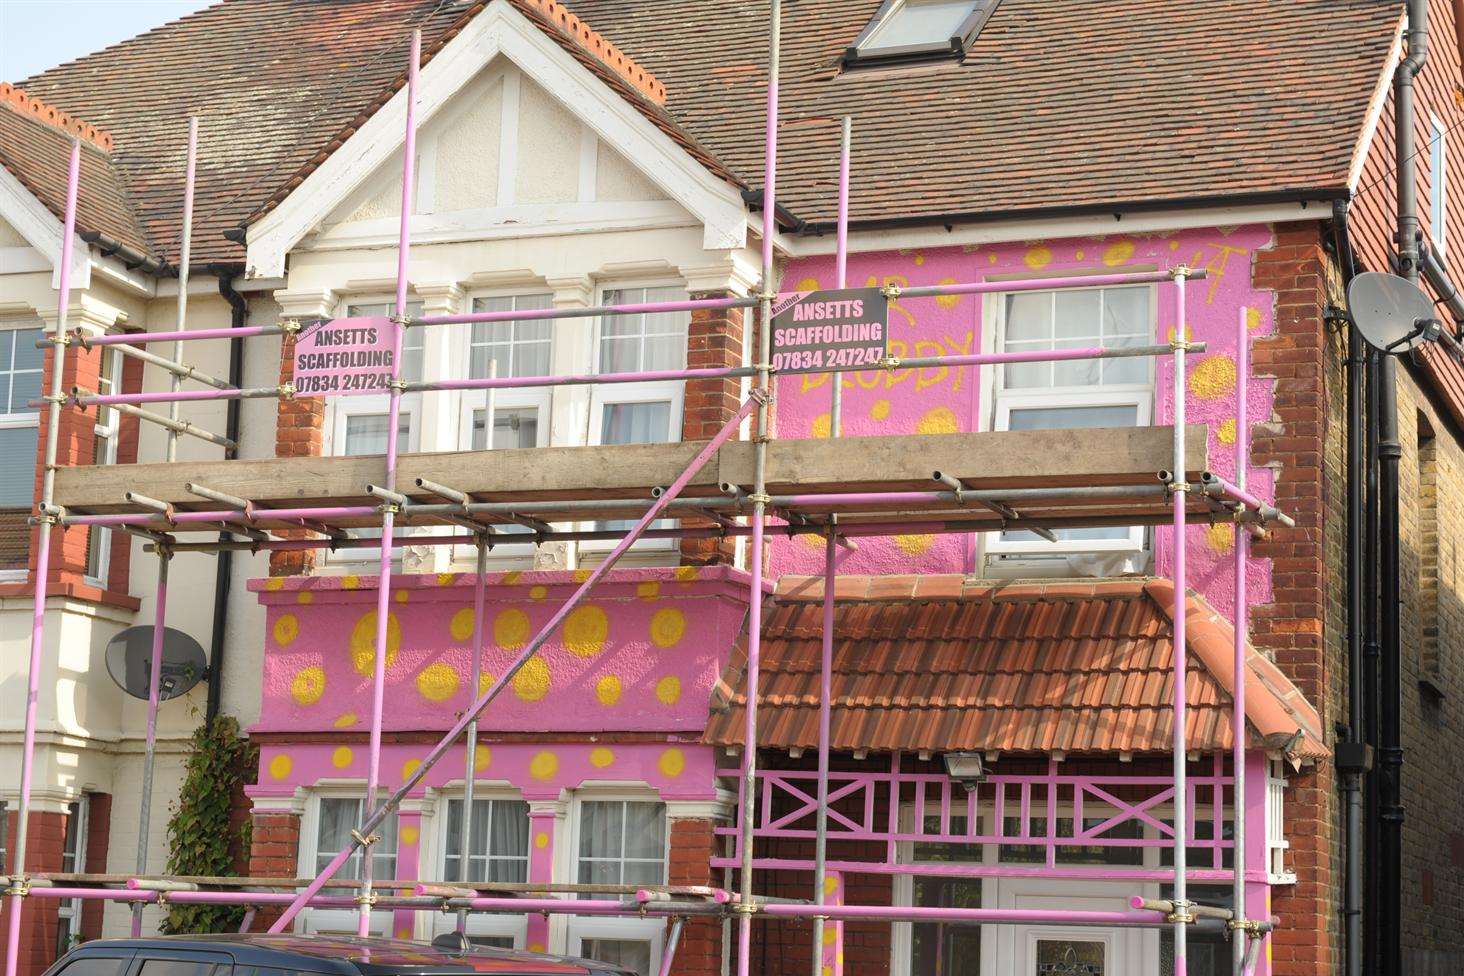 Painted pink and covered in yellow spots, the finished Mr Blobby house in Dartford